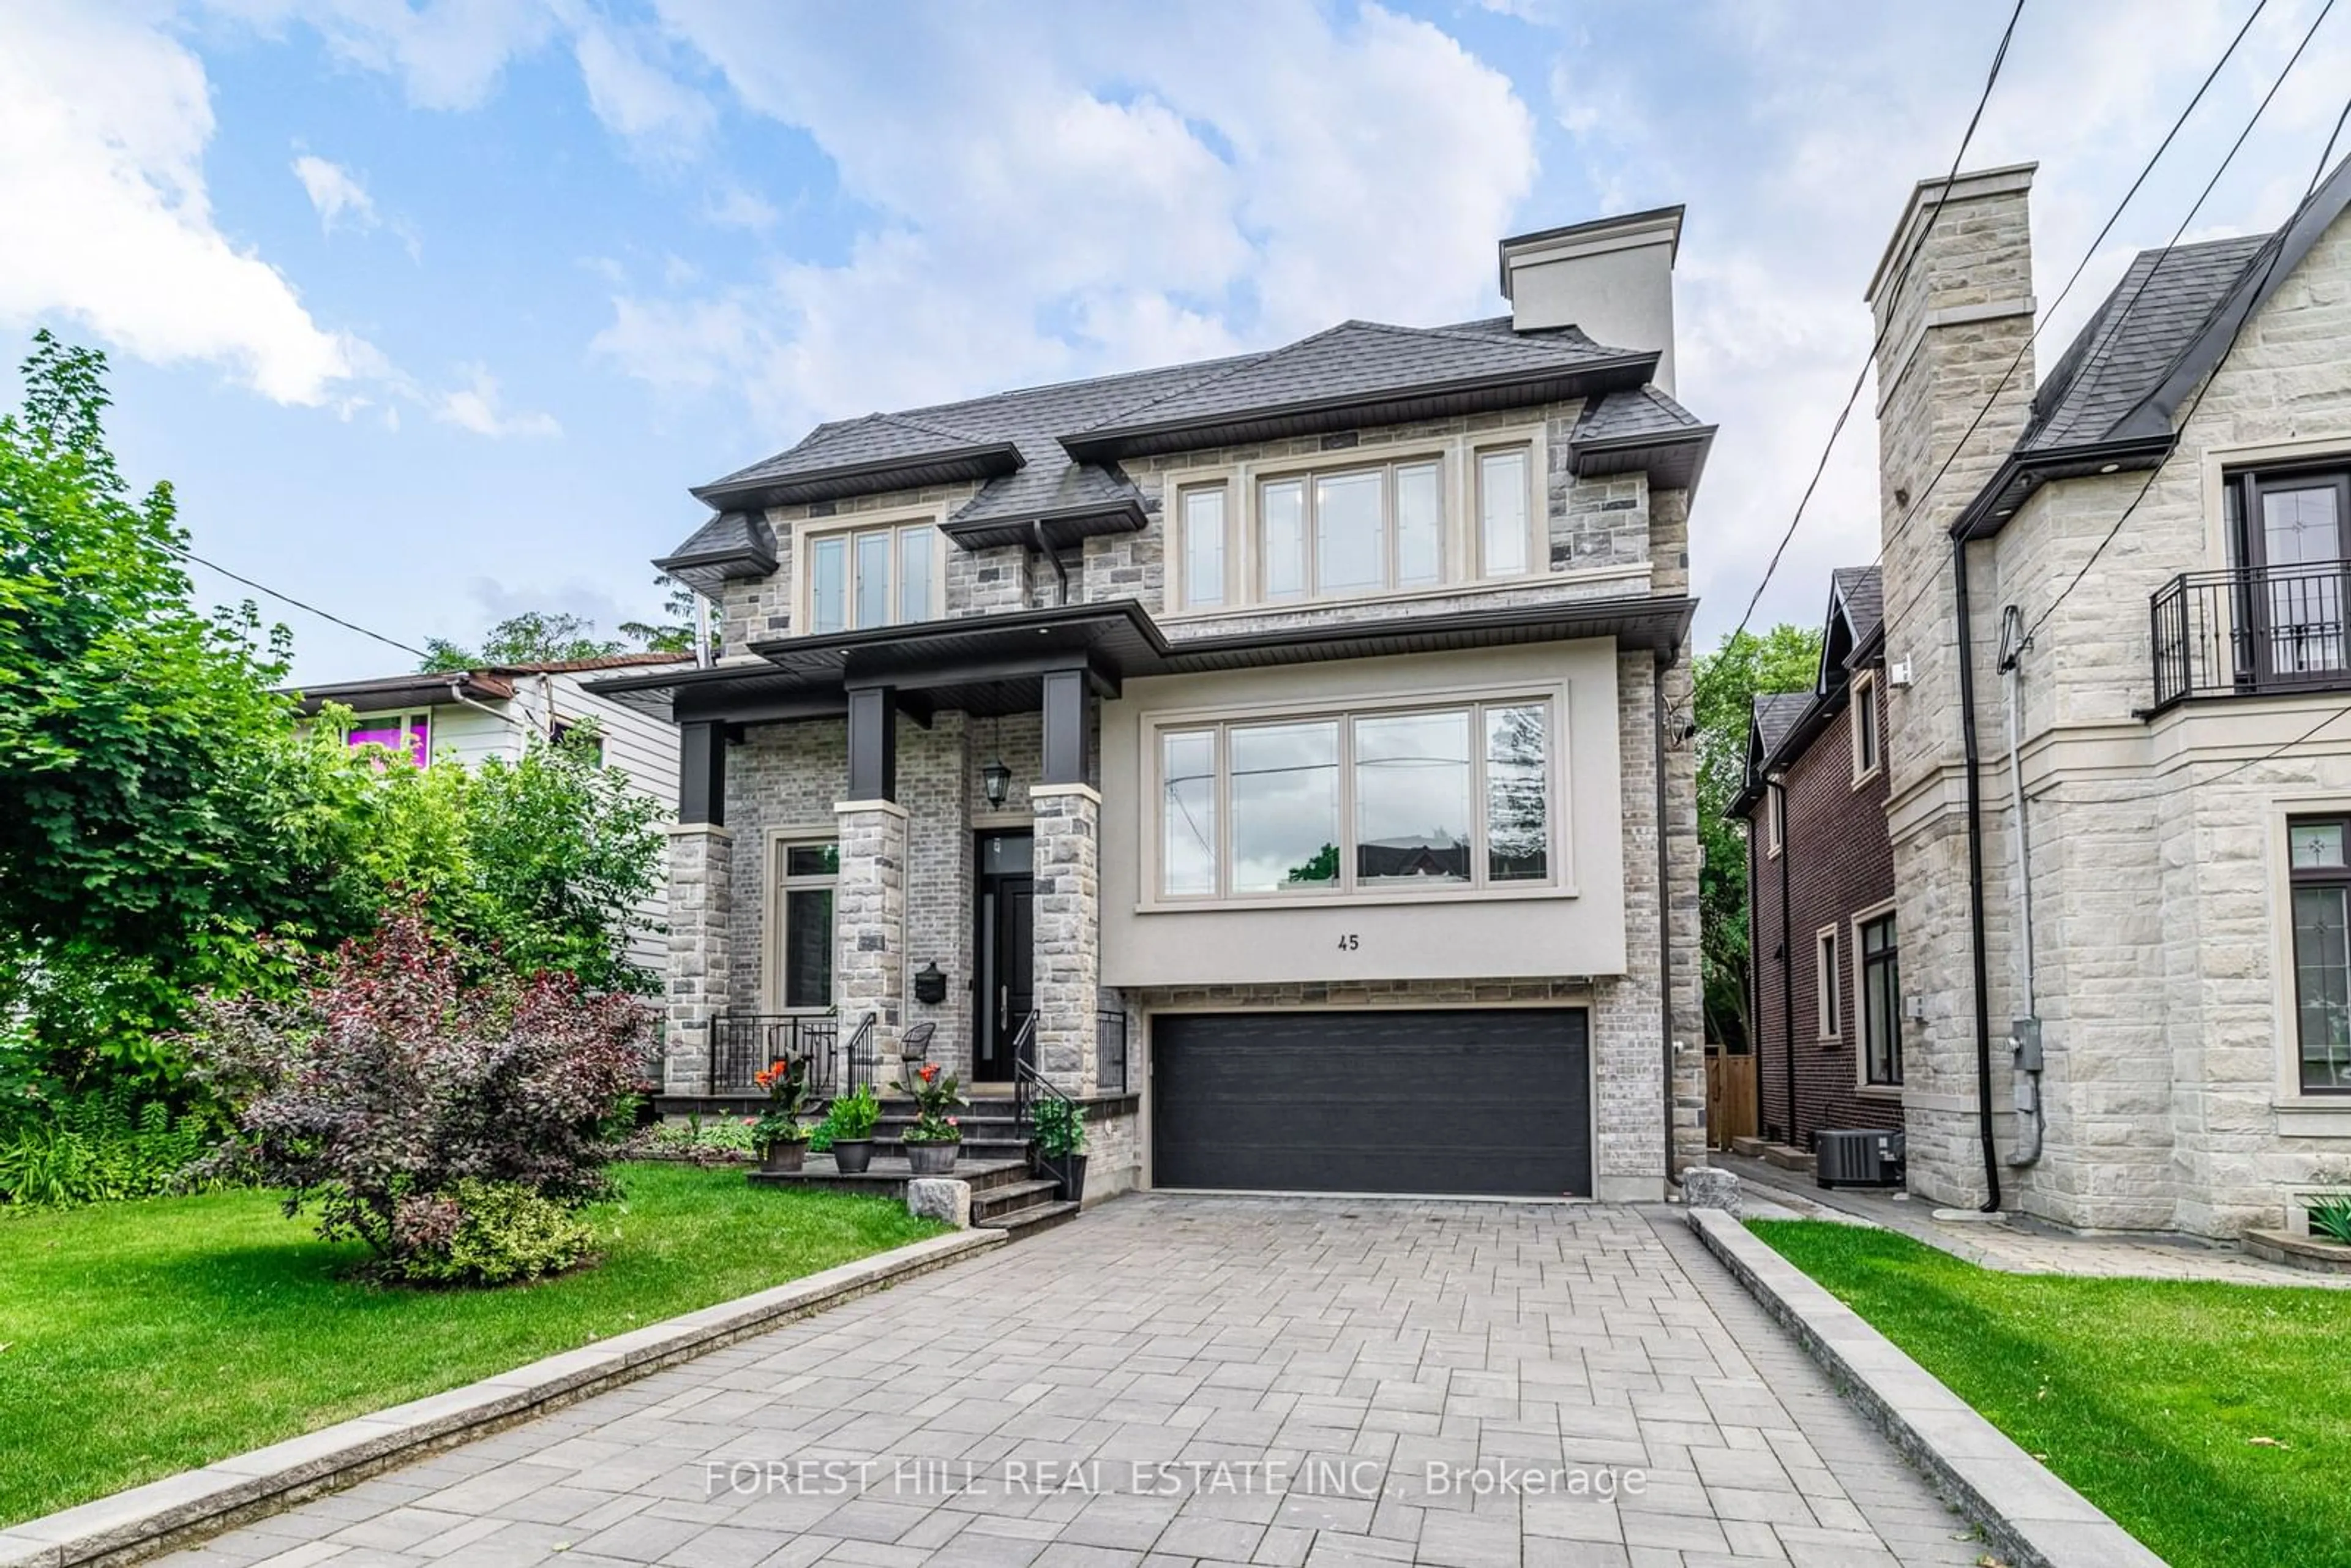 Home with brick exterior material for 45 Wedgewood Dr, Toronto Ontario M2M 2H4